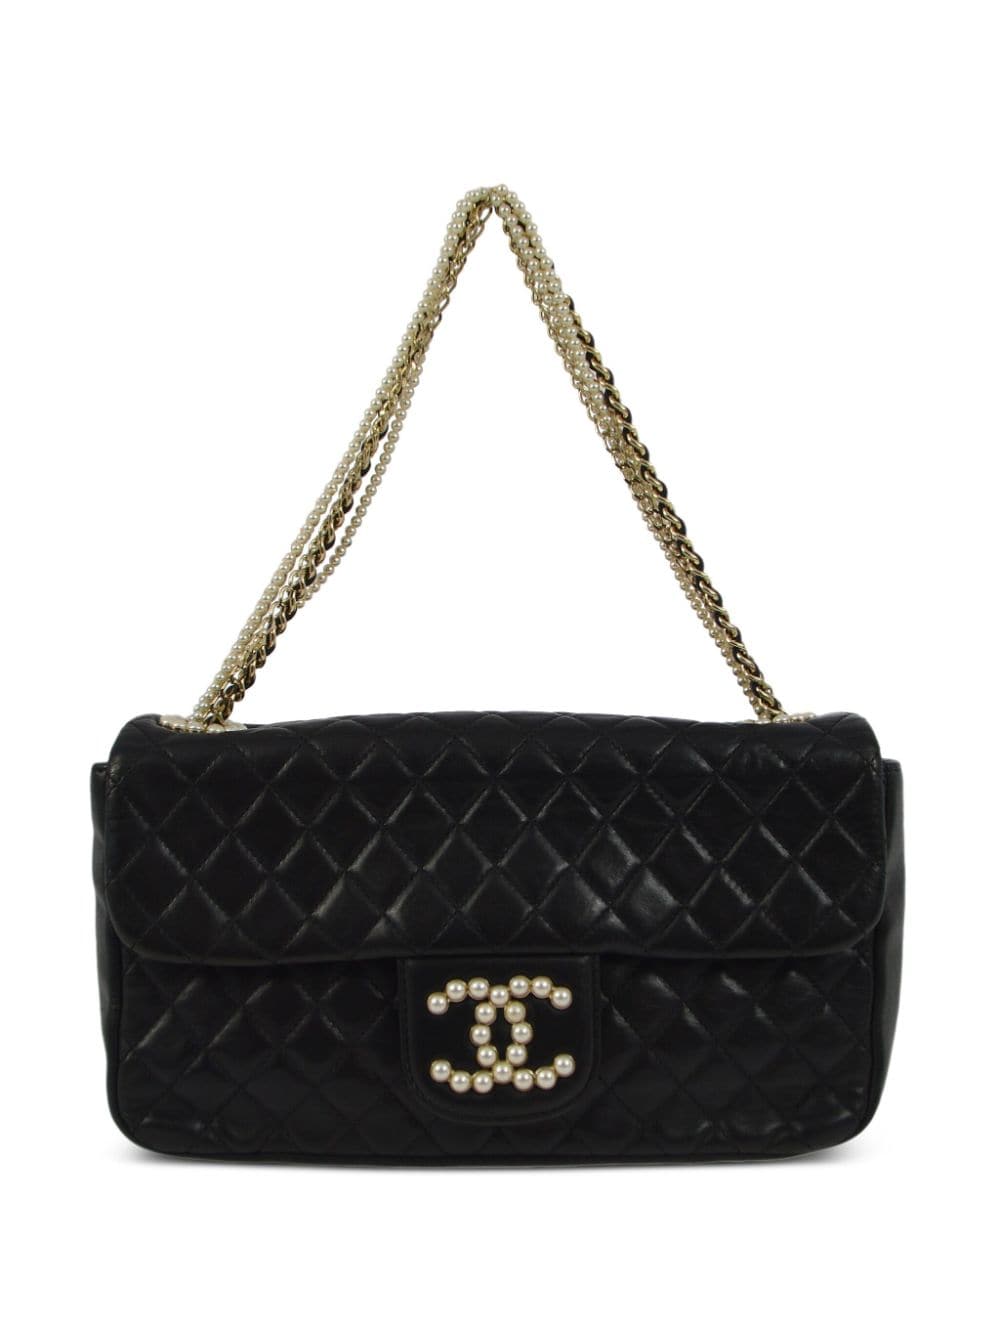 Pre-owned Chanel Westminster 单肩包（2010年典藏款） In Black